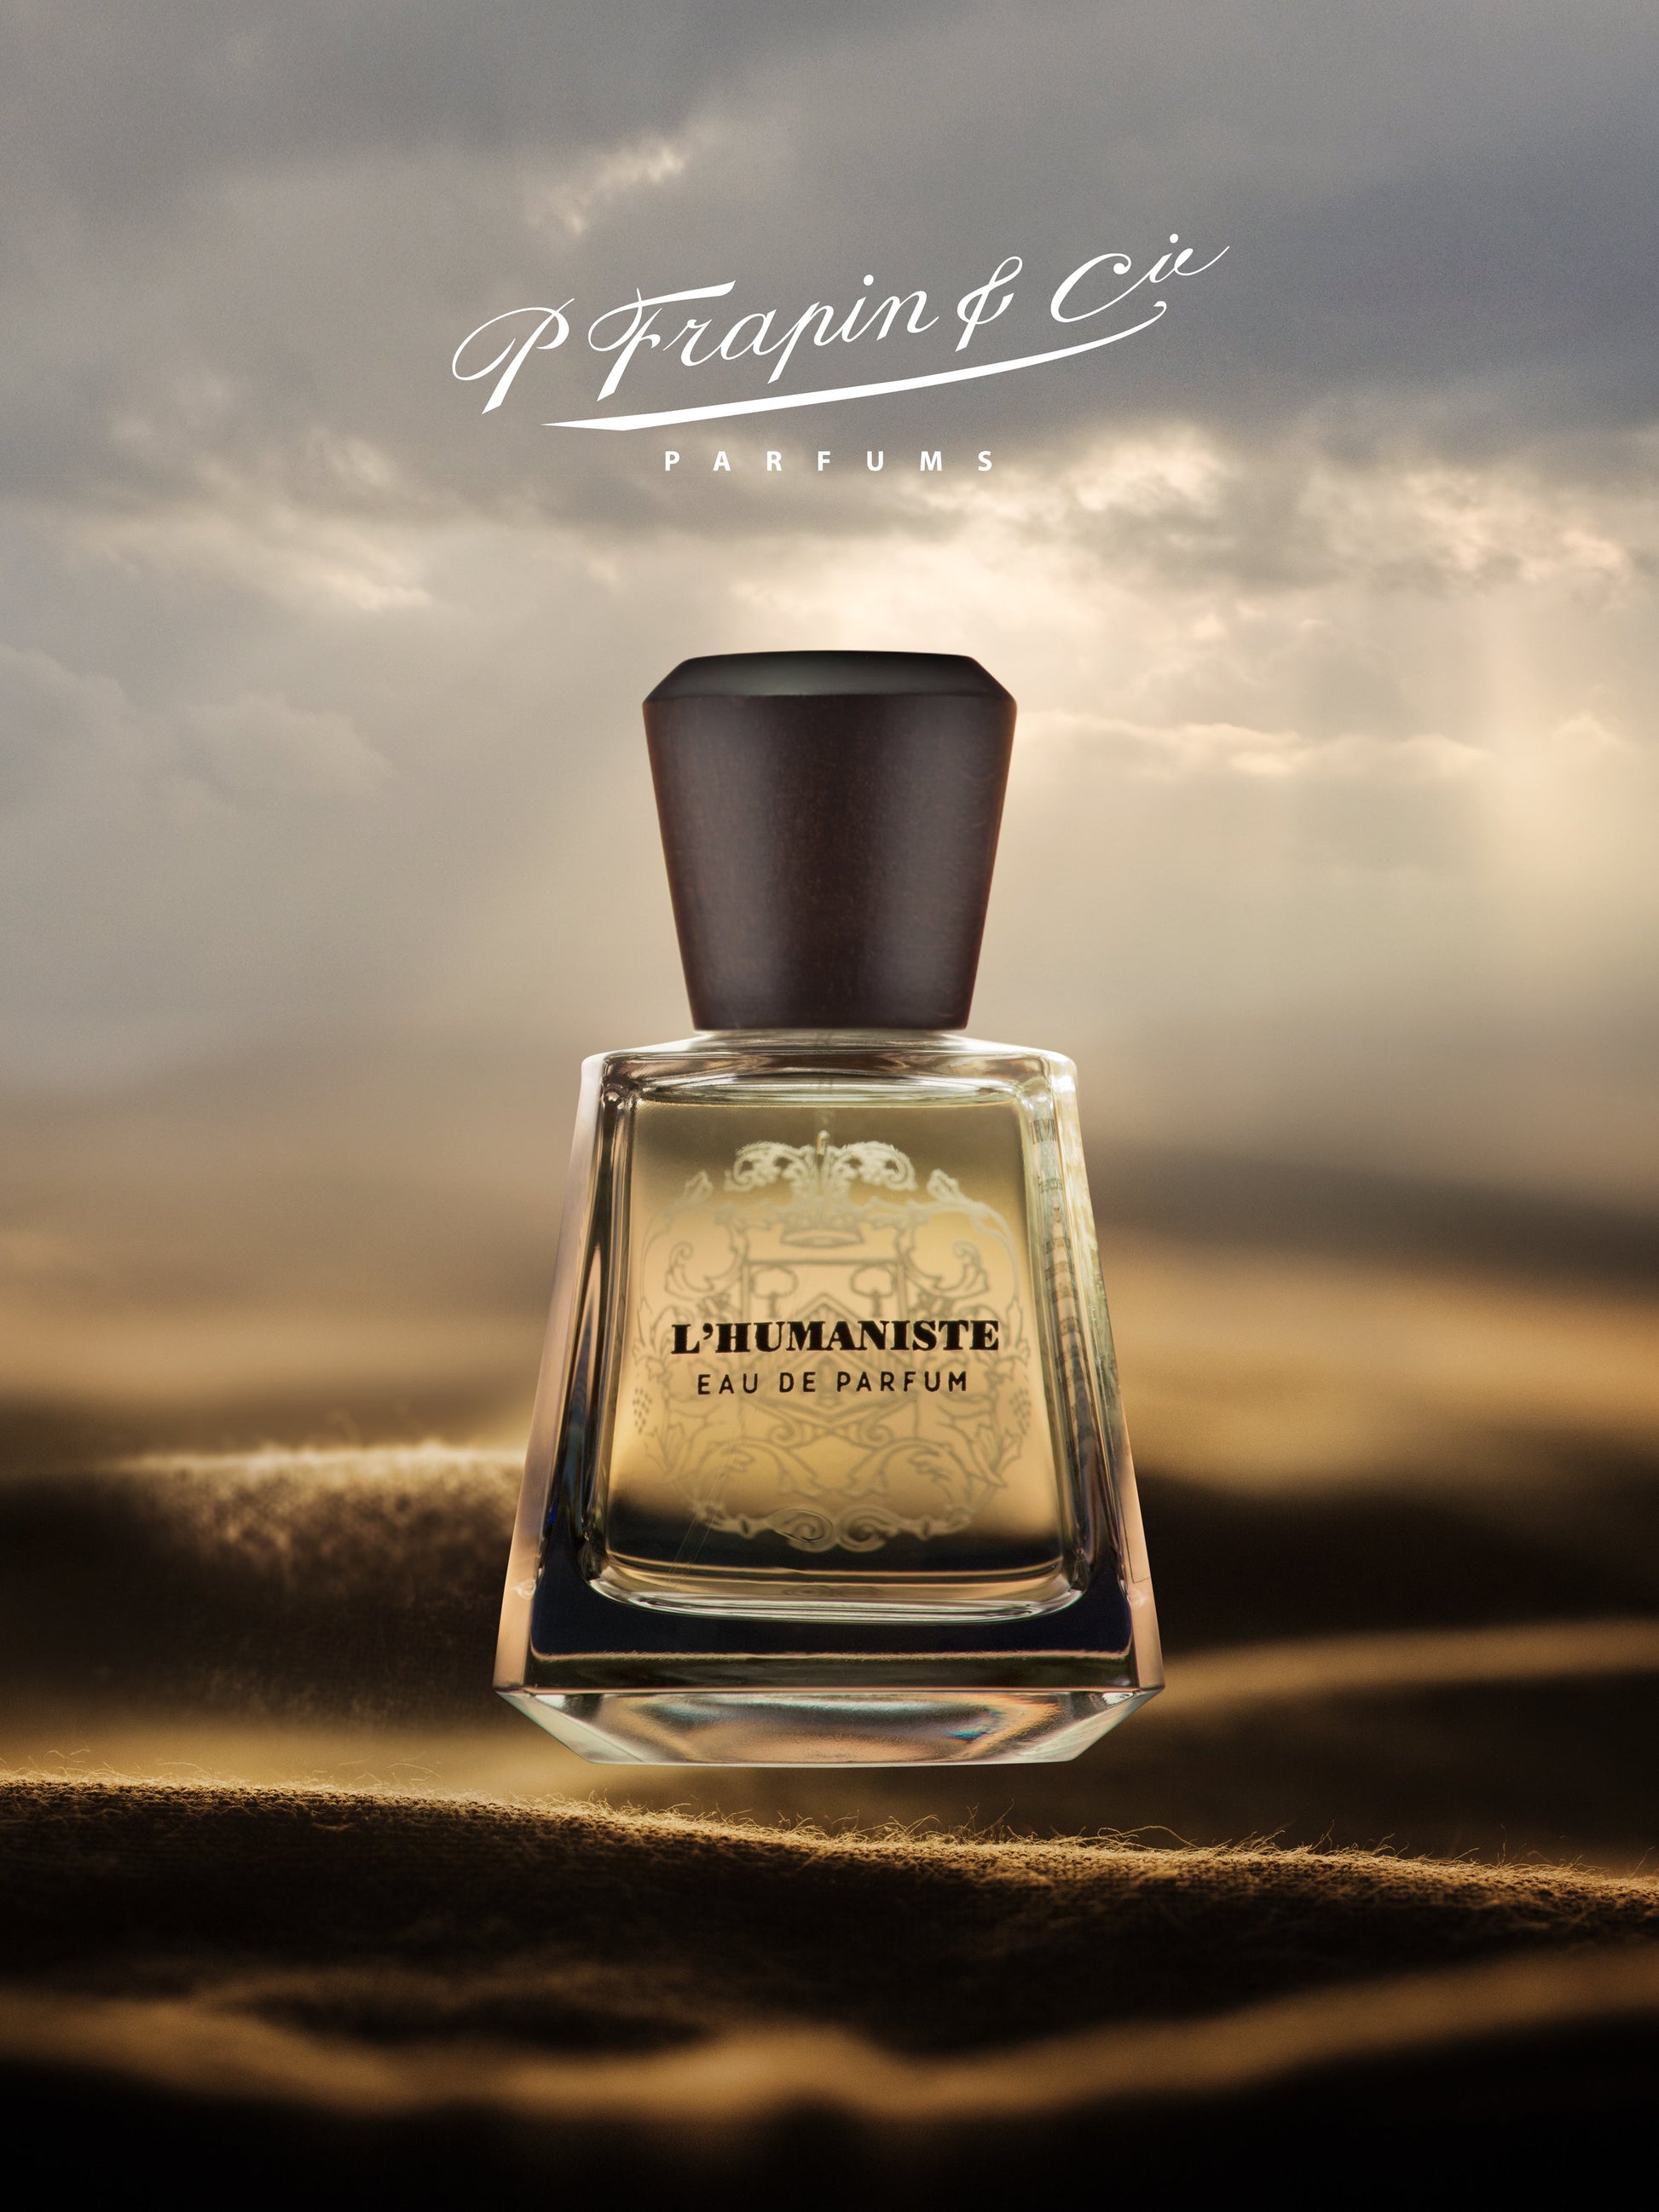 L'Humaniste - P.Frapin & Cie 100ml